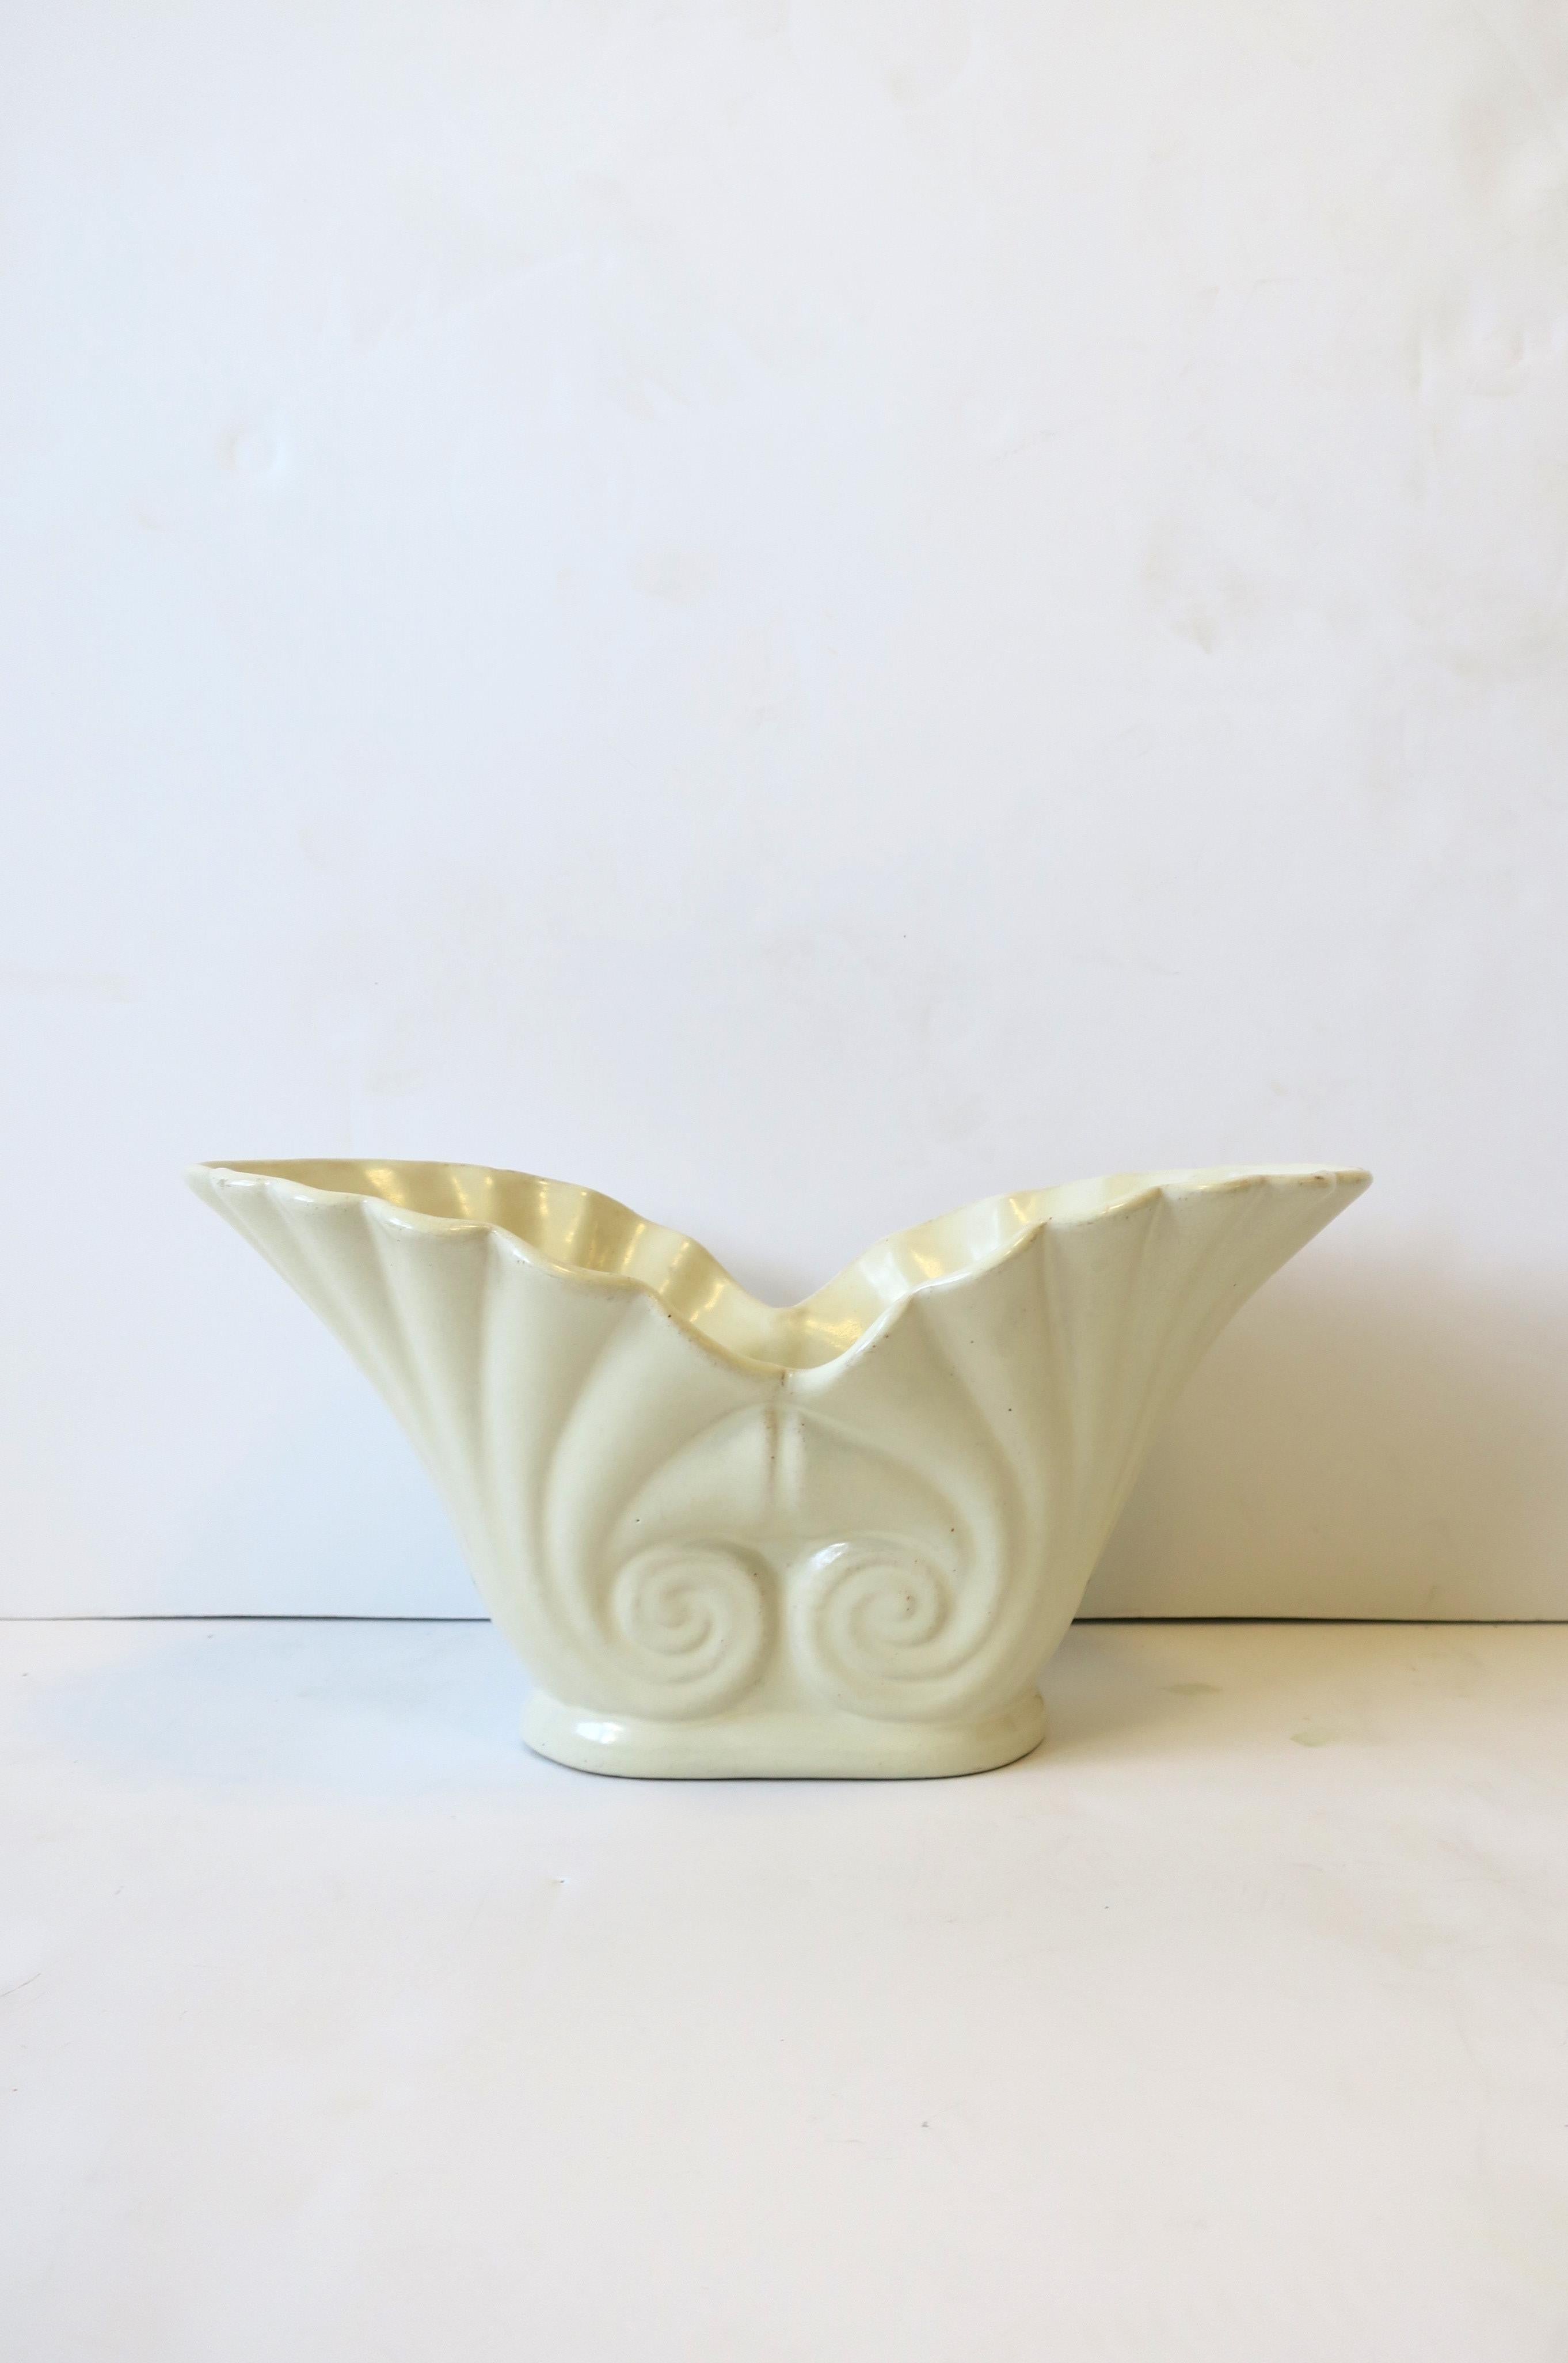 Nautilus Seashell Pottery Jardiniere or Cachepot Flower Plant Holder Art Deco In Good Condition For Sale In New York, NY